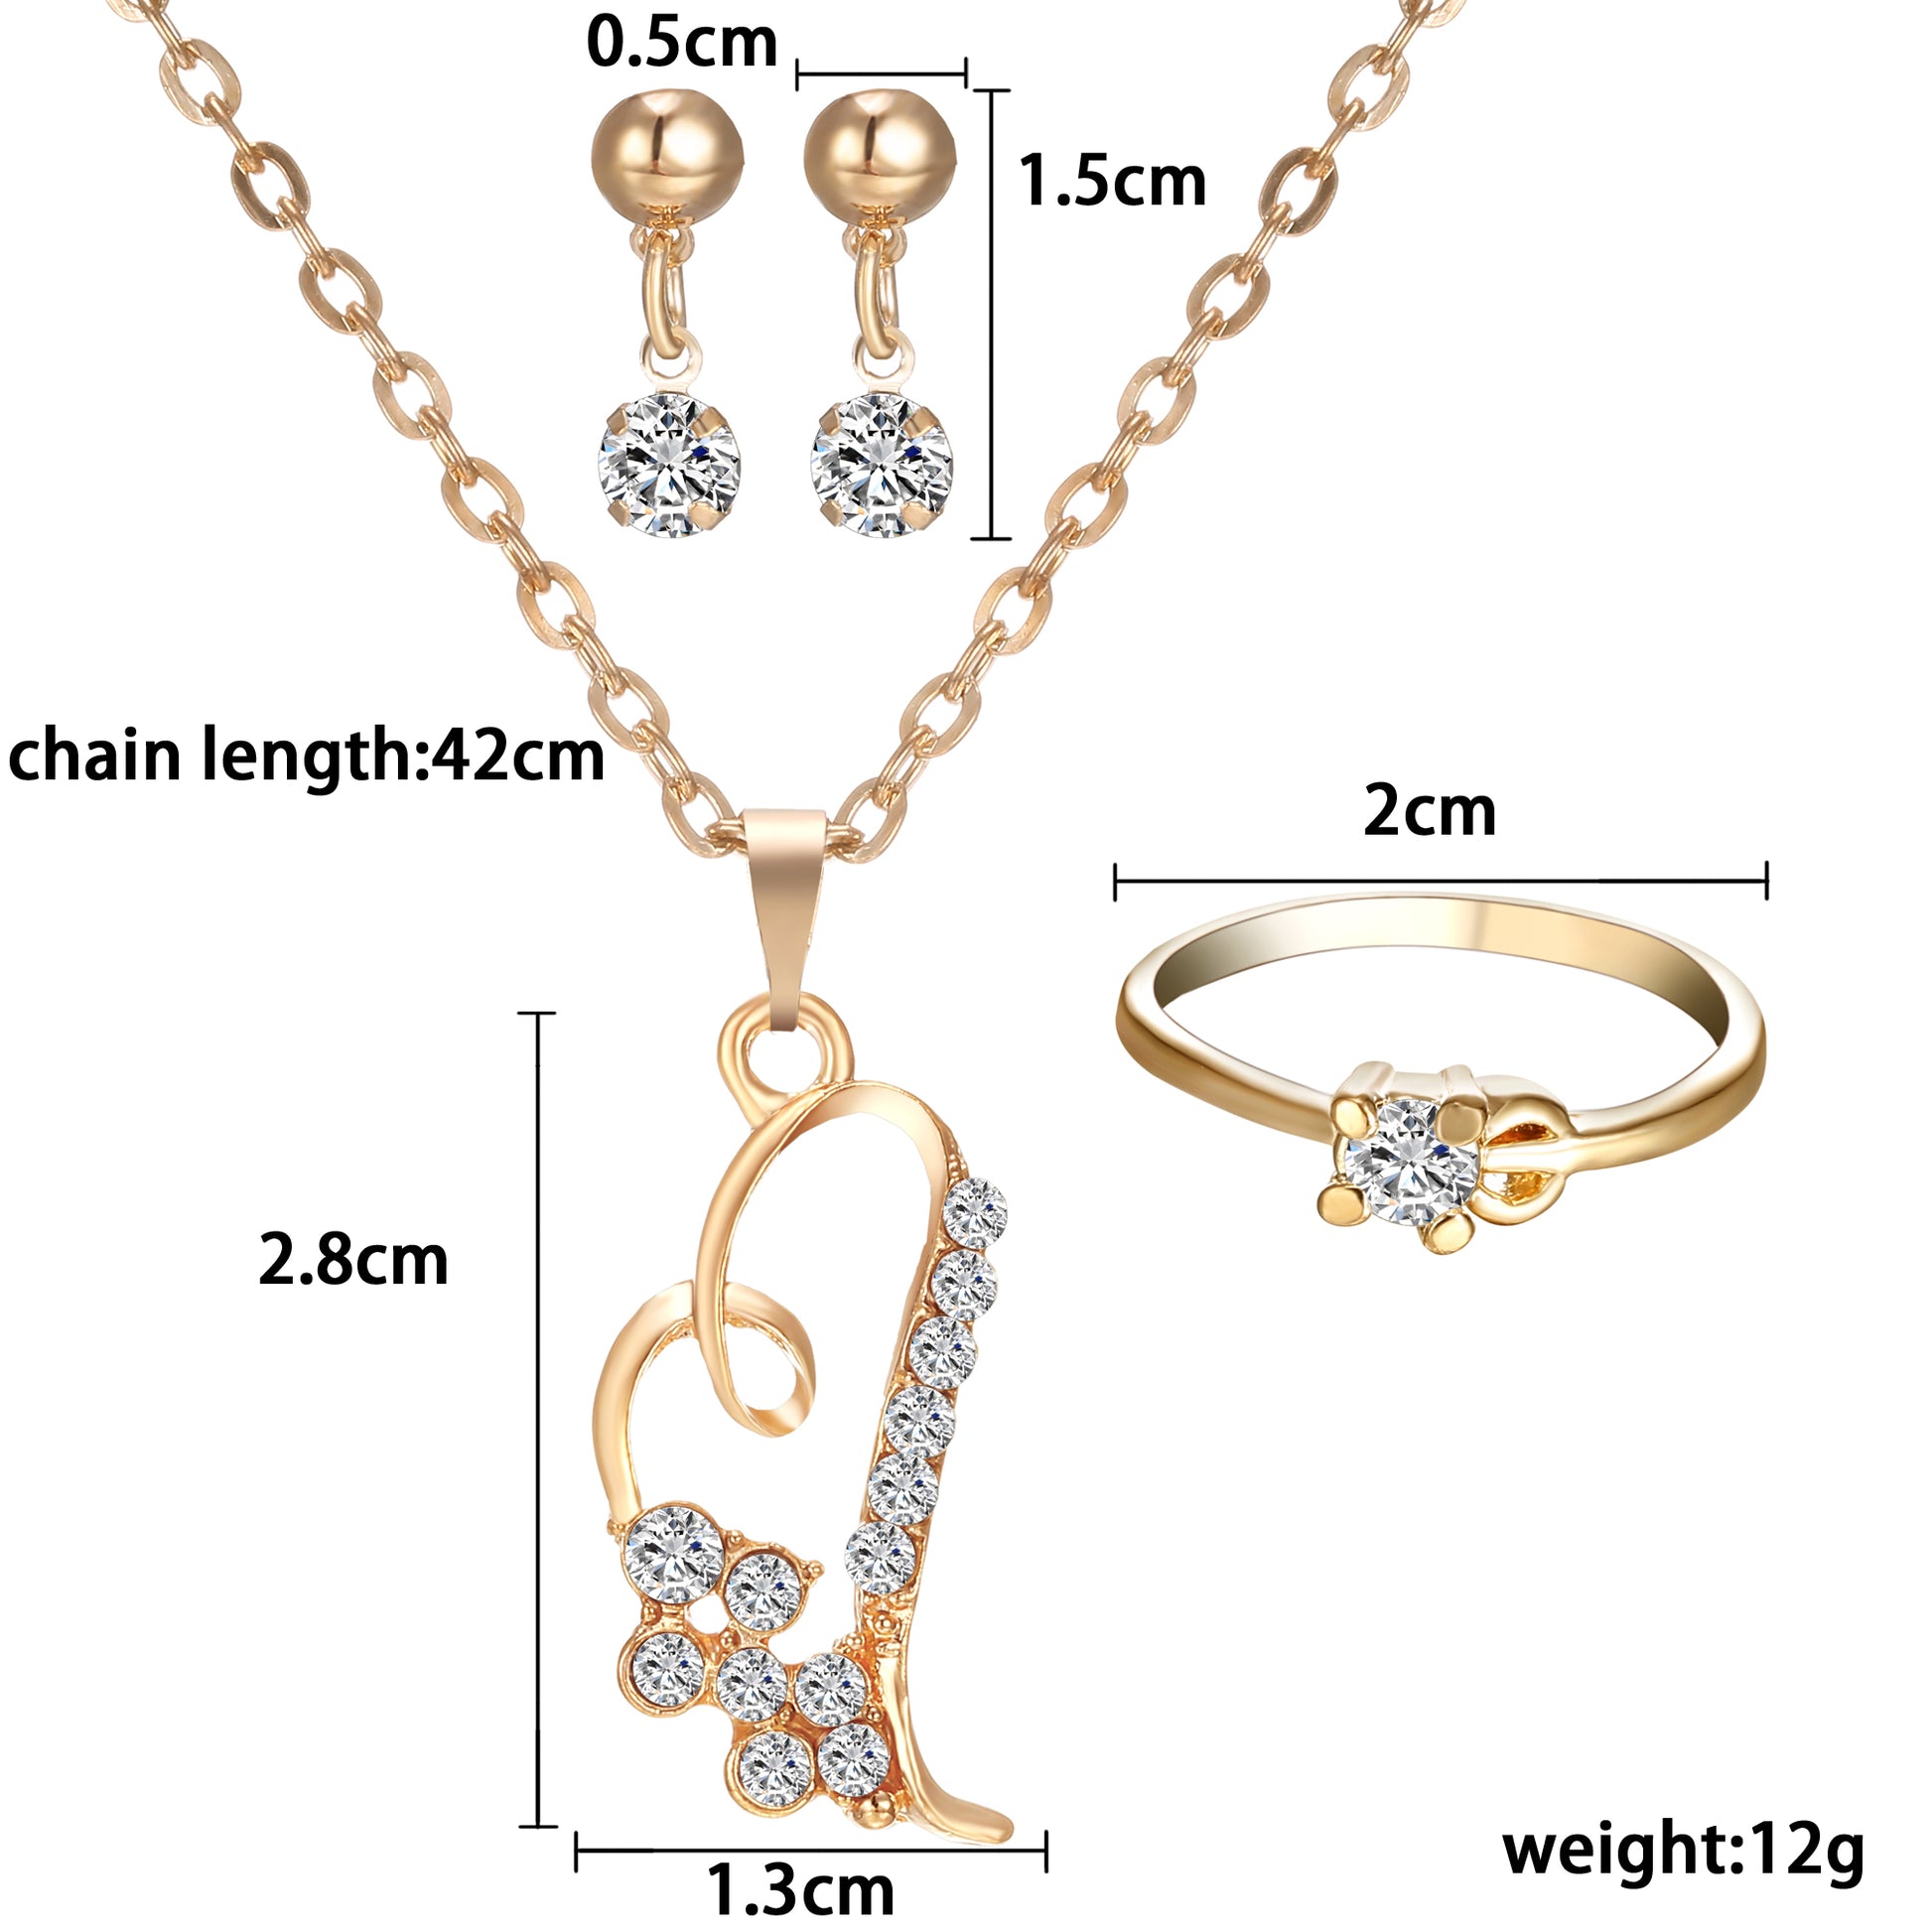 Romantic Heart Pendant Necklaces Jewelry Set Exquisite Earring Rings - ONEZINOTTA , jewelery that shines like gold...